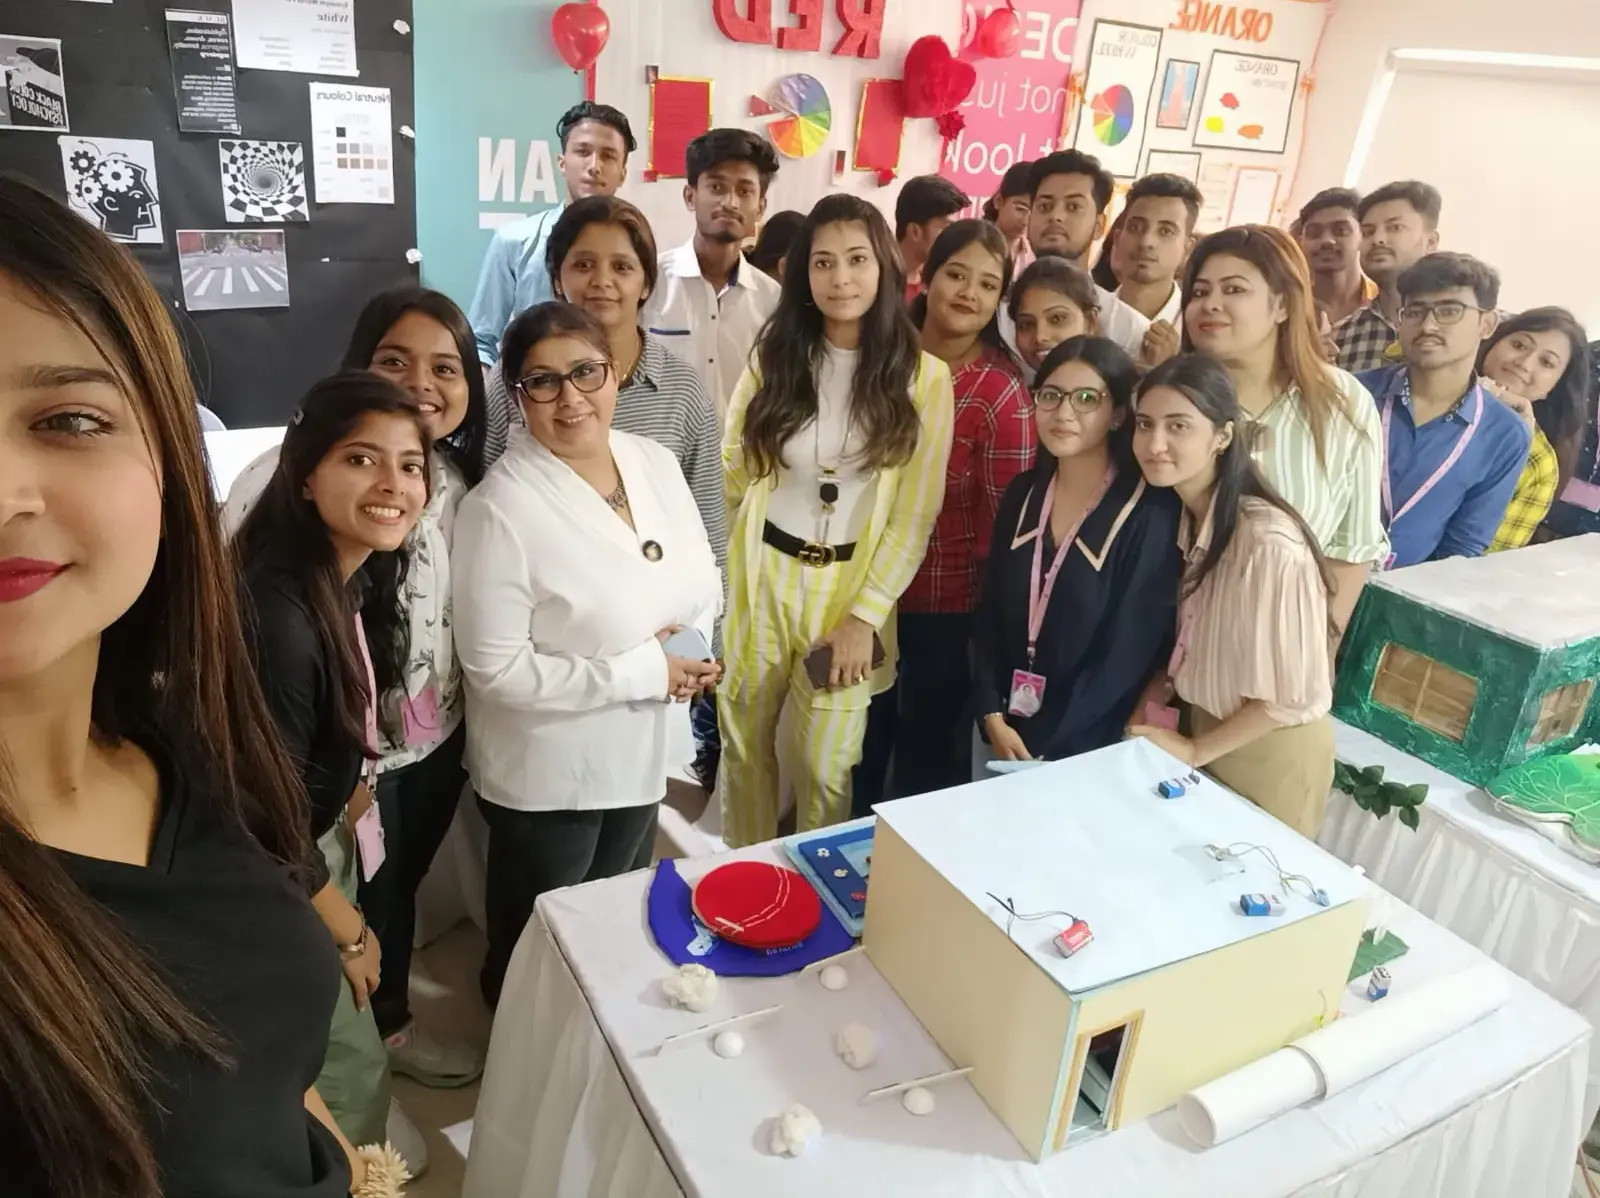 Harmony 2022 Team Red with Teachers - The Annual Interior Design Exhibition in Kolkata